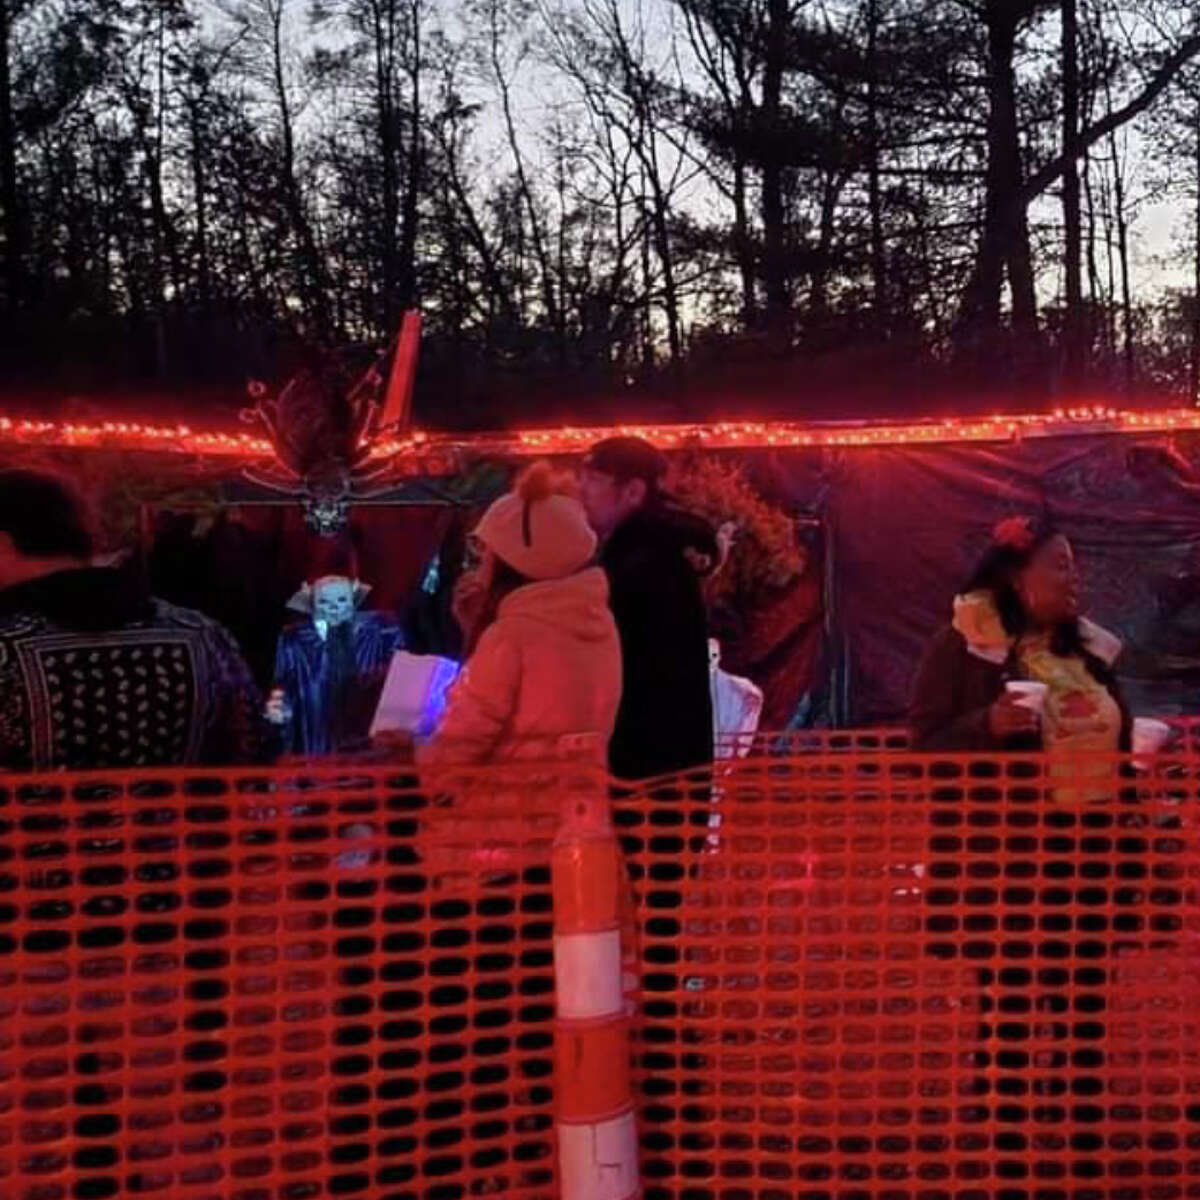 The weather was perfect for a night of frightful fun at the S&K Haunted Trail.